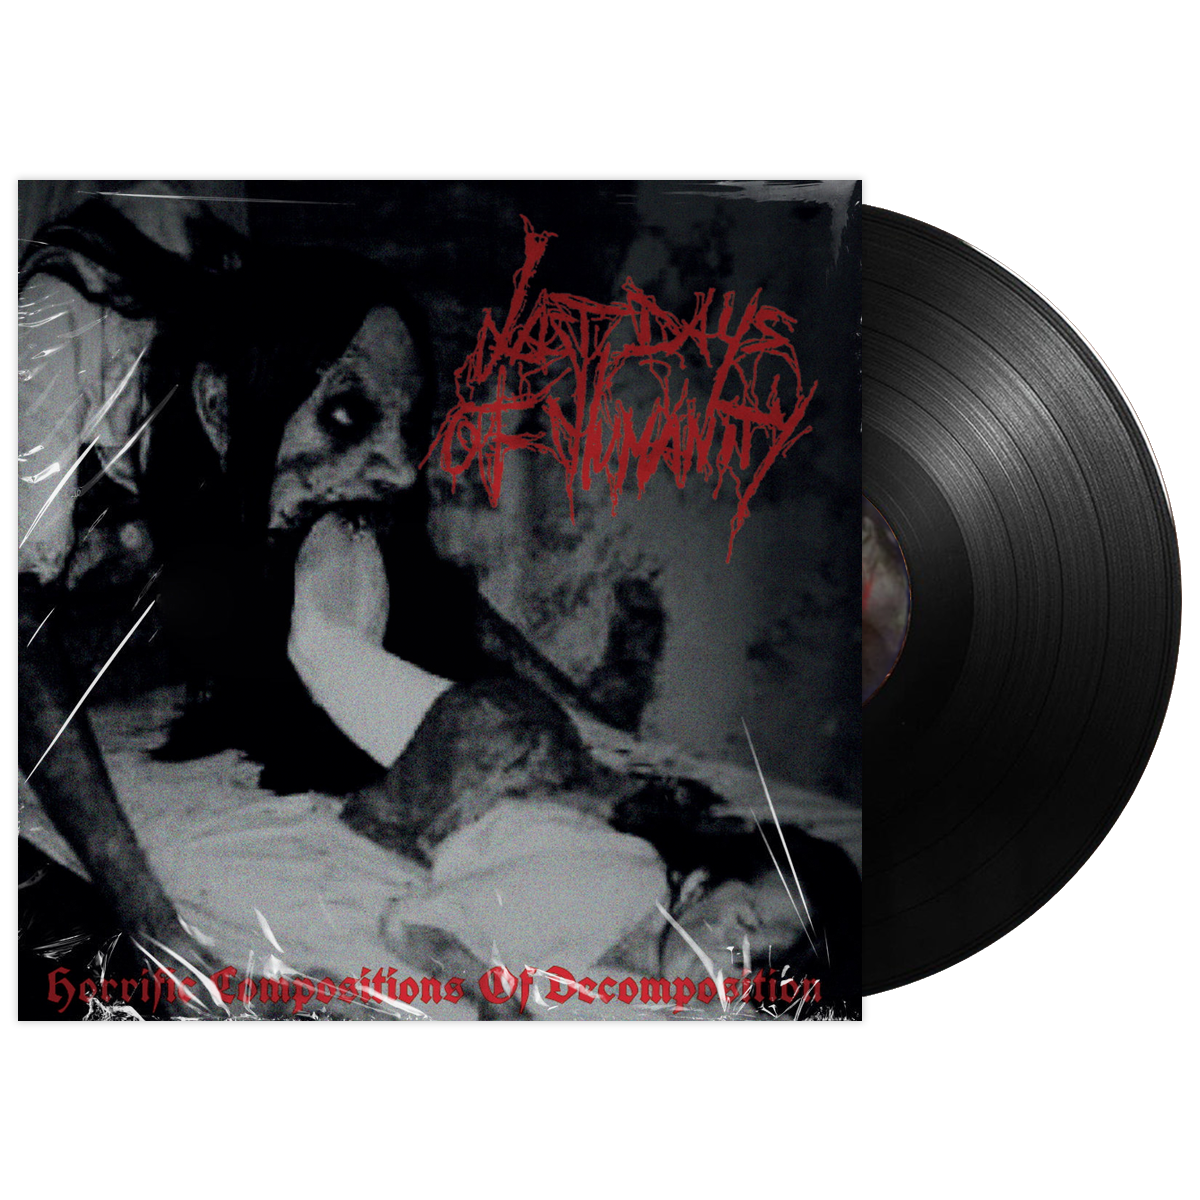 Last Days Of Humanity 'Horrific Compositions Of Decomposition' LP